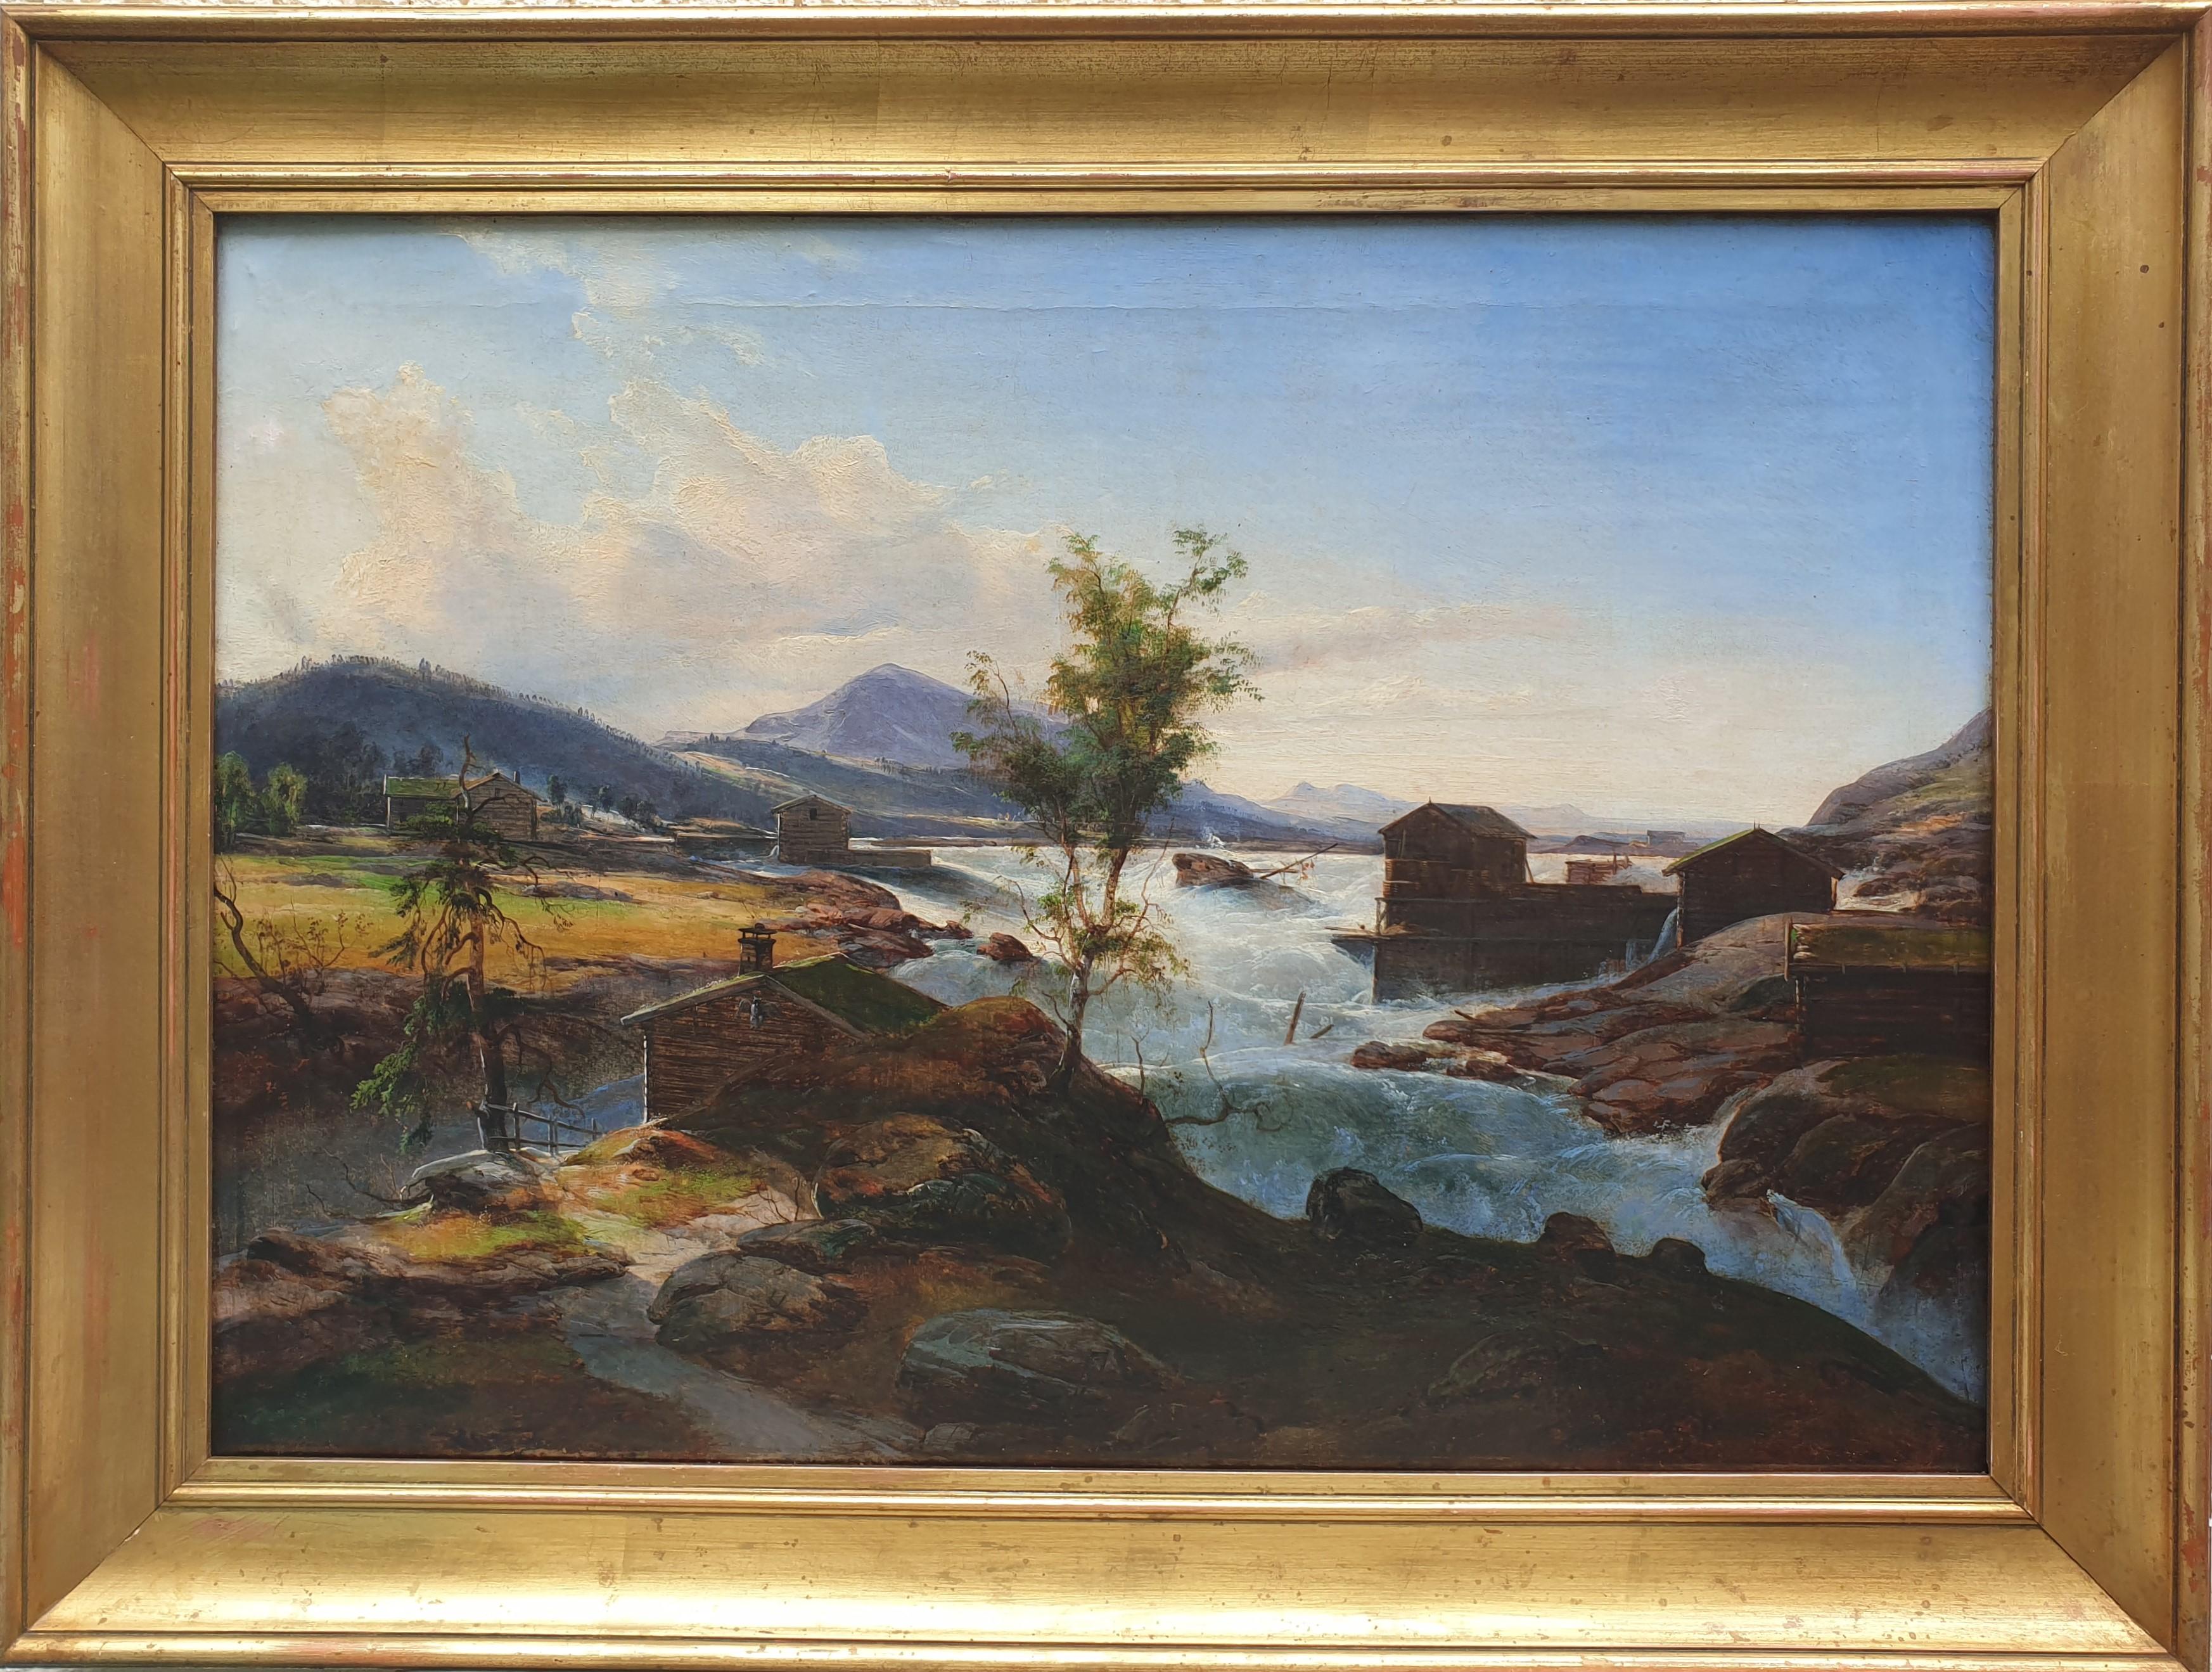 French or Swiss school Lanscape mountains Late 19th Flood scene river lake owl